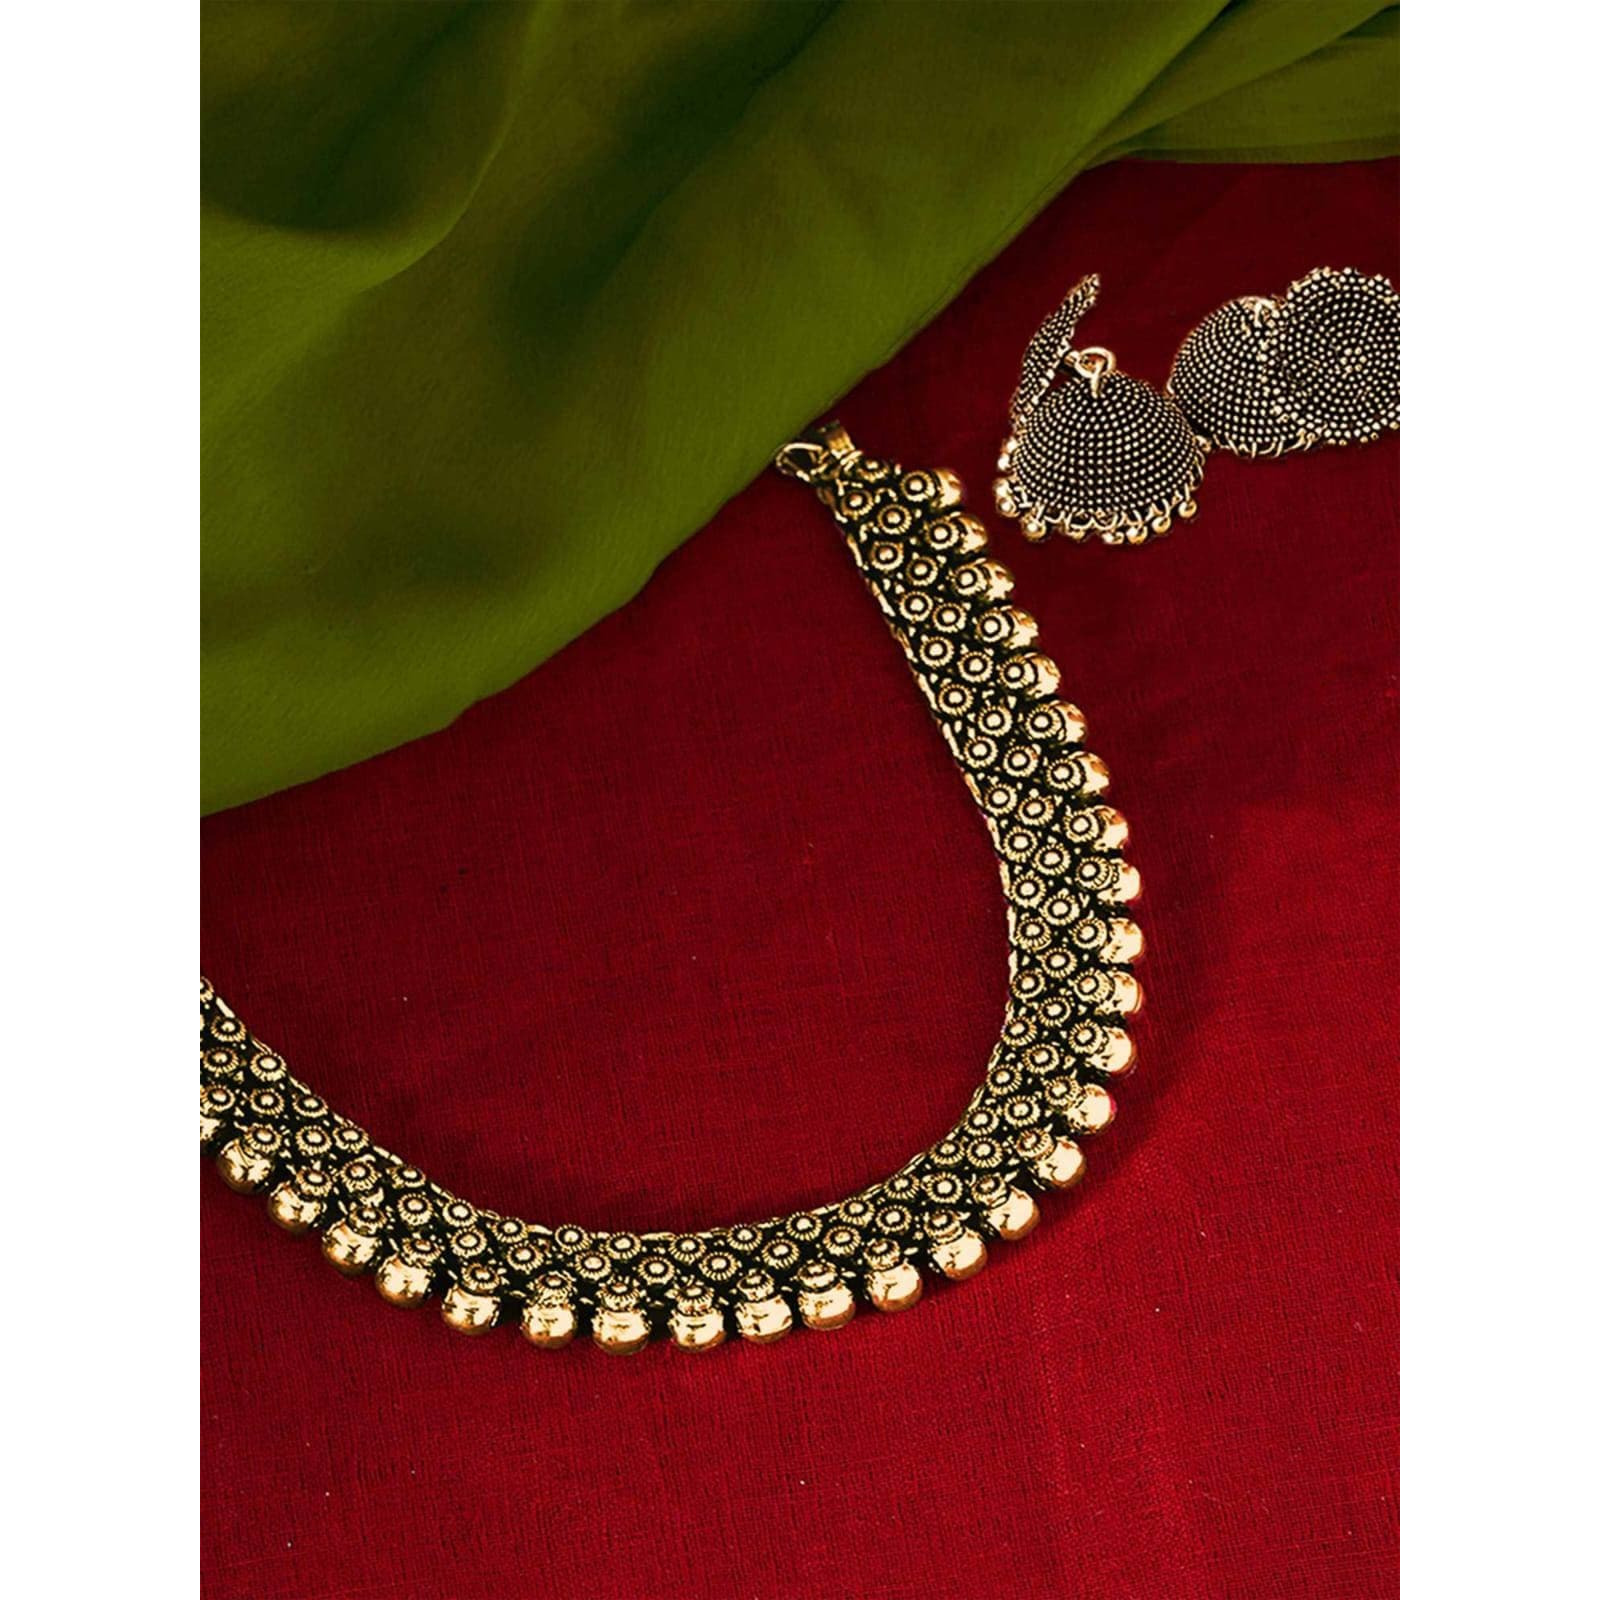 Versatile and Bold, This necklace features intricate motifs with playful ghungroos that gracefully falls on your neck to give stunning look. This necklace is a one stop solution to achieve a rich and vibrant look. Style this up with our sarees or go bold with indo-western outfits for a classy boho look!